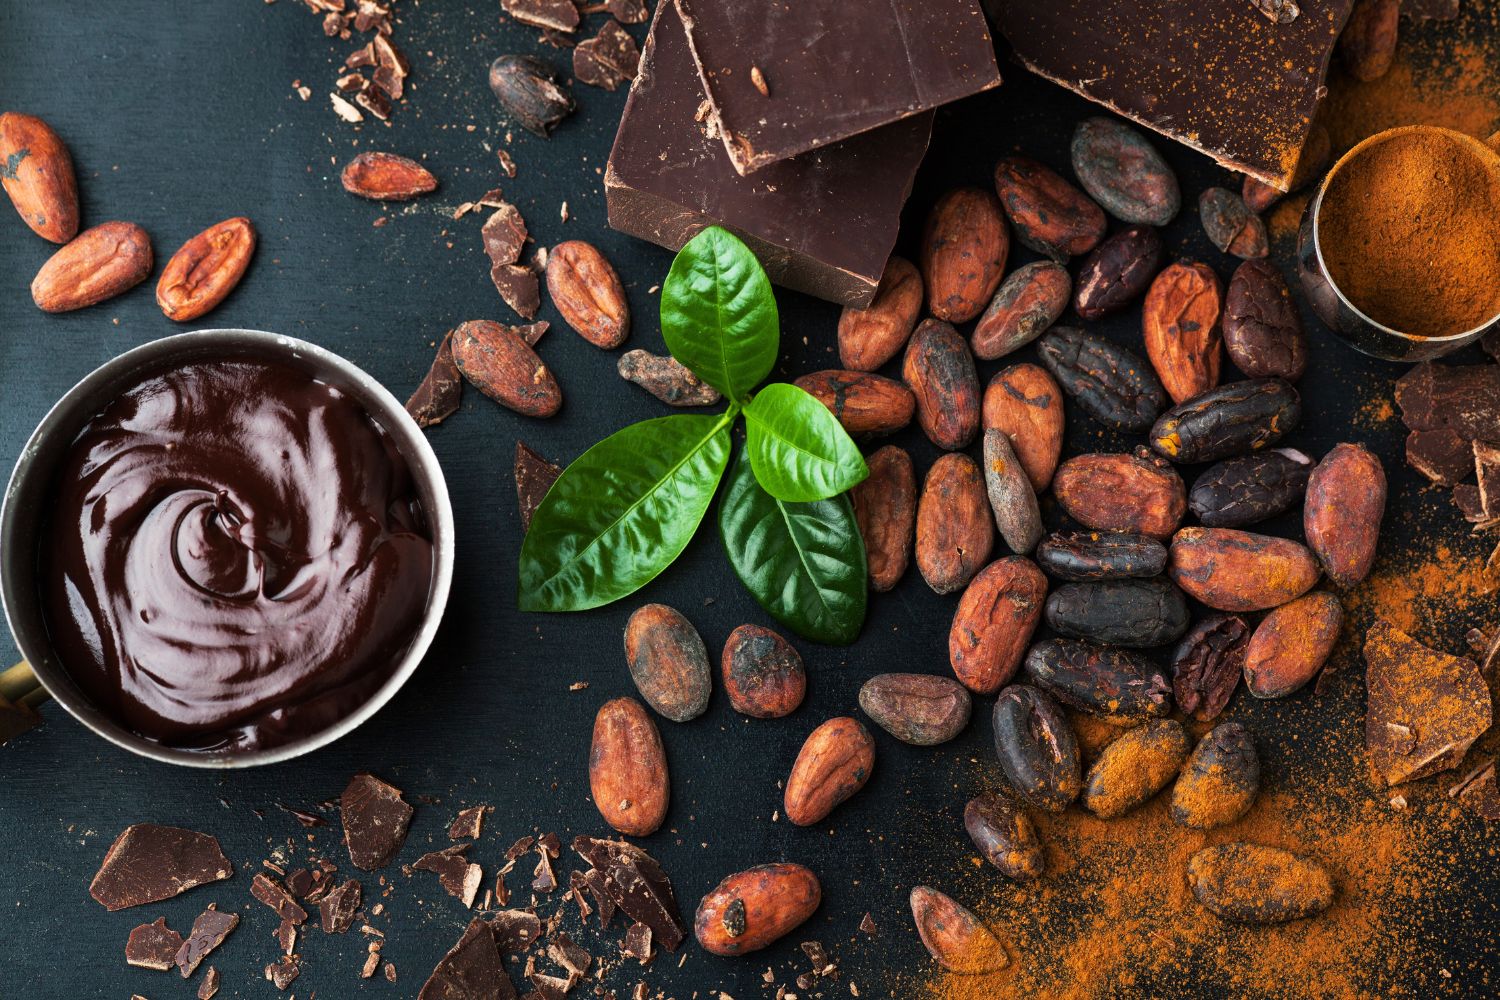 The nutritional value of Peruvian chocolate